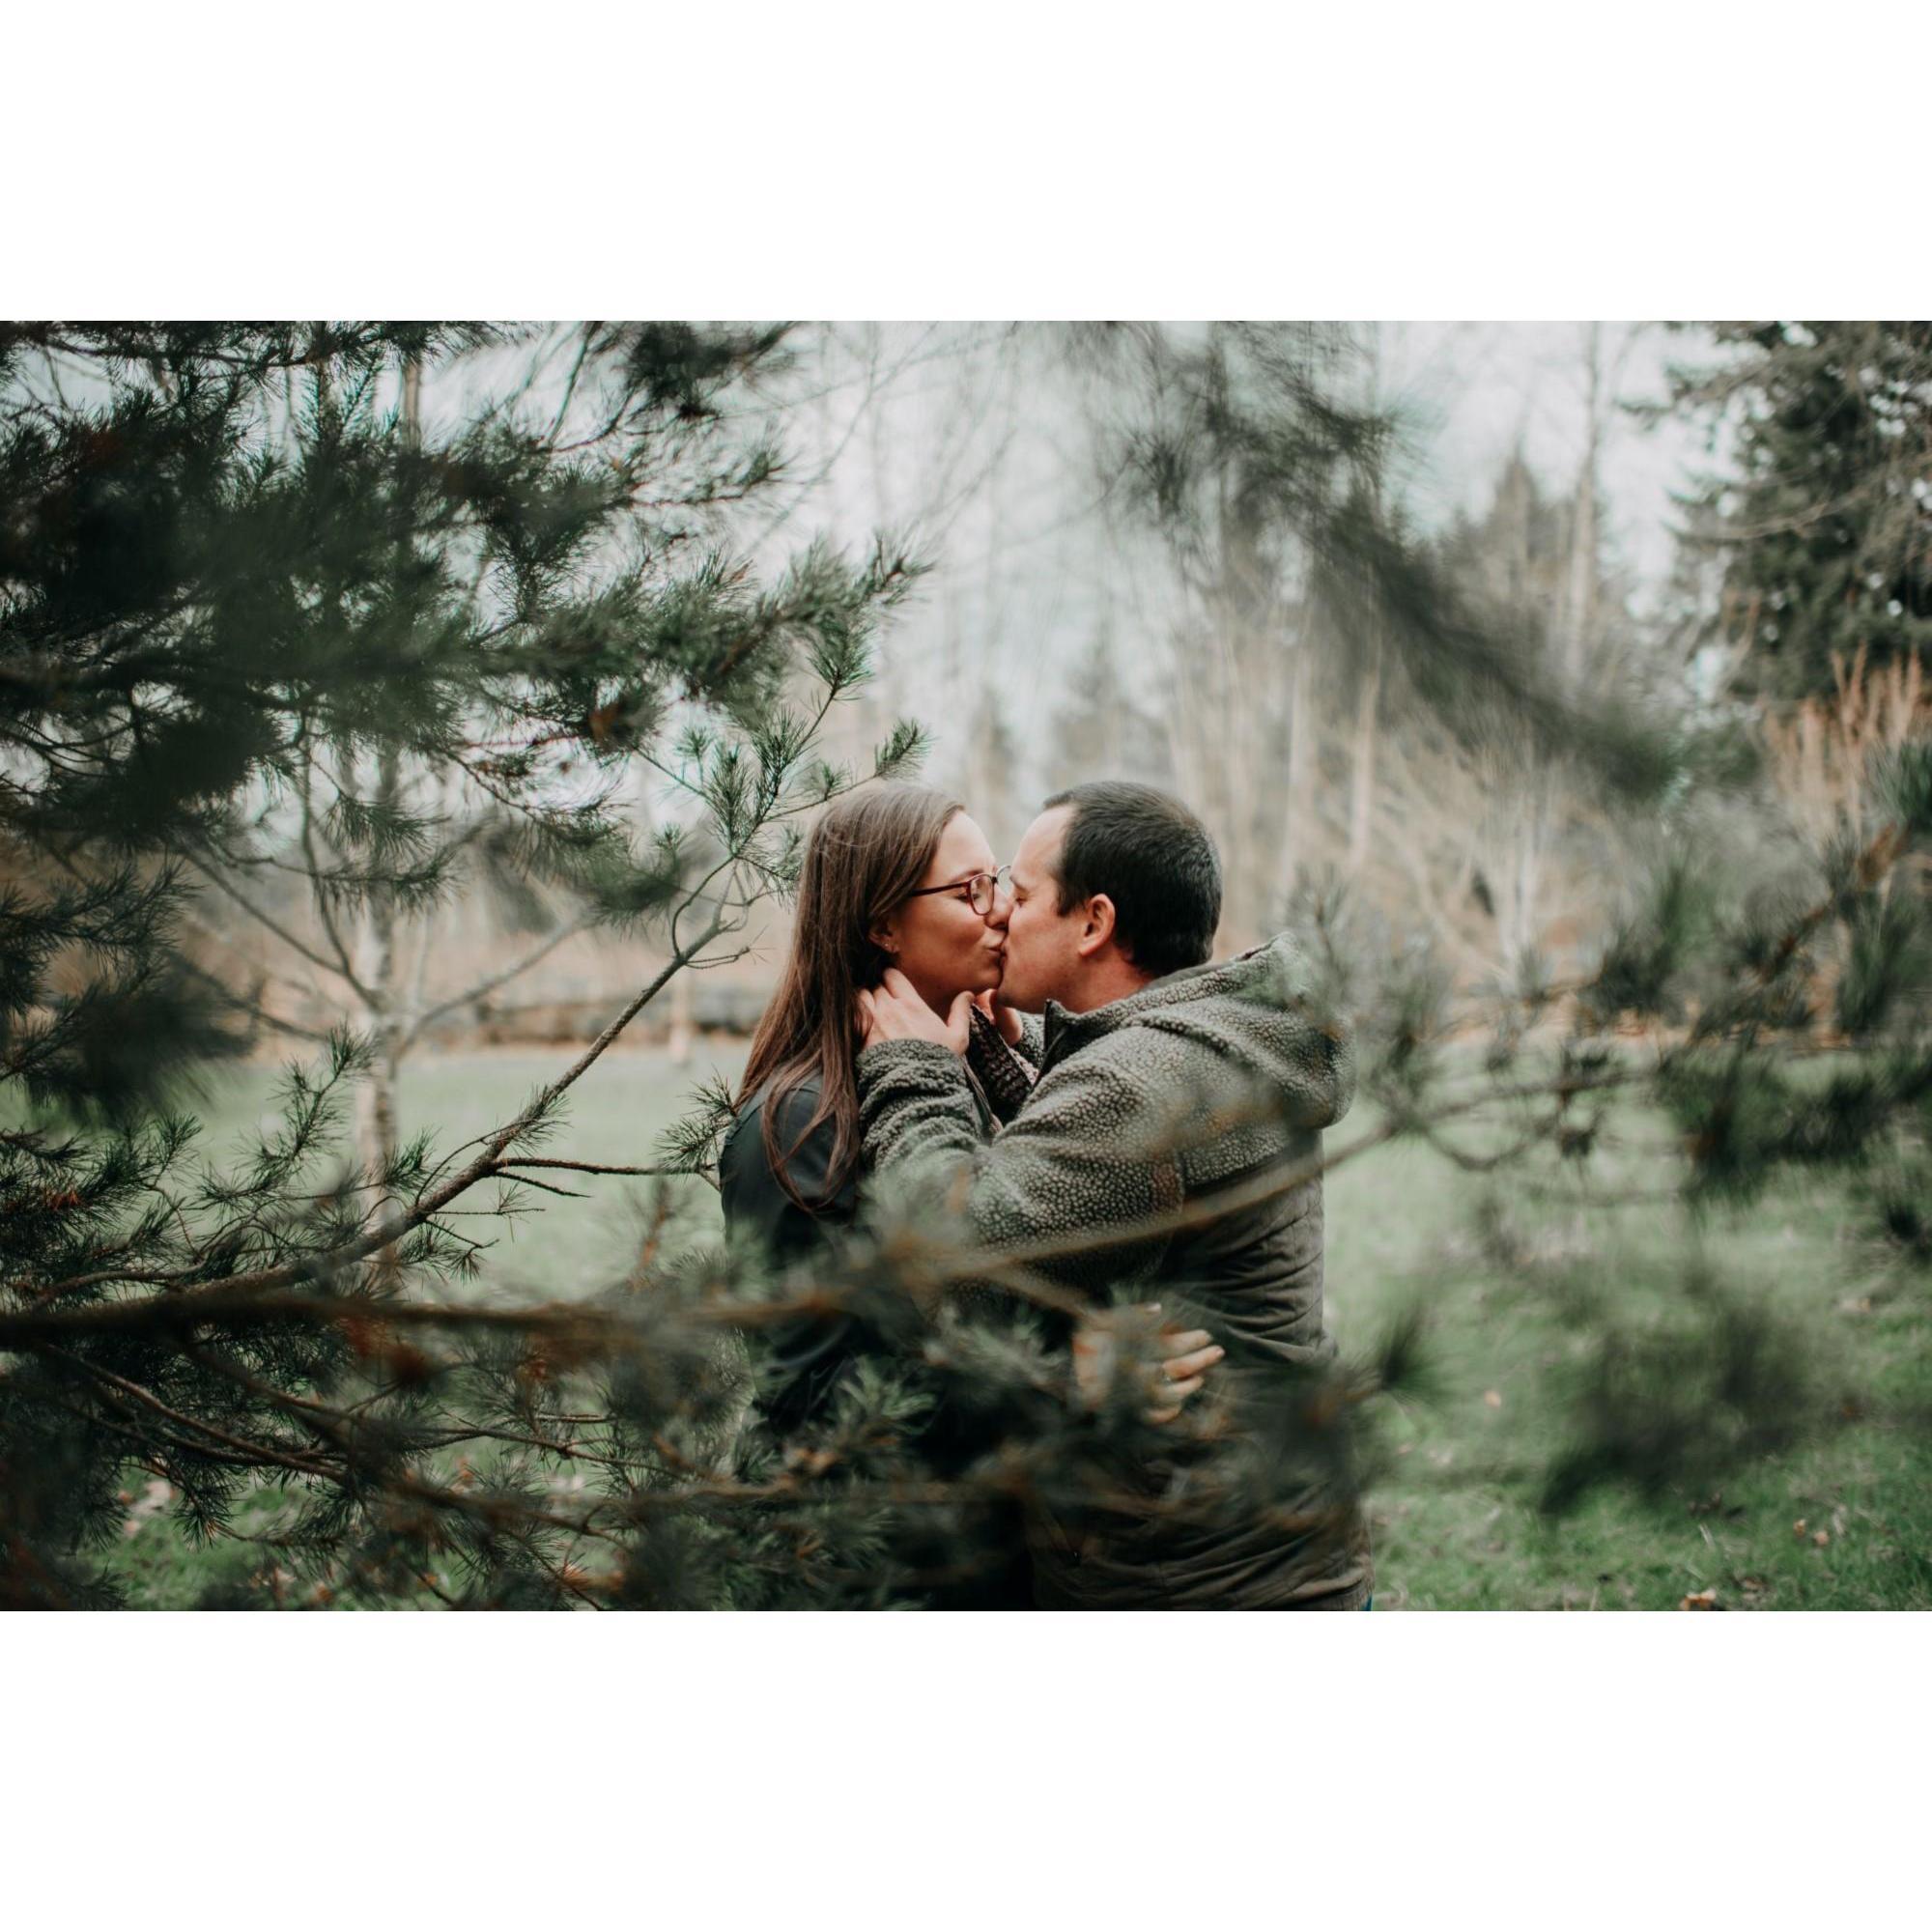 Engagement Shoot at our house - January 2020